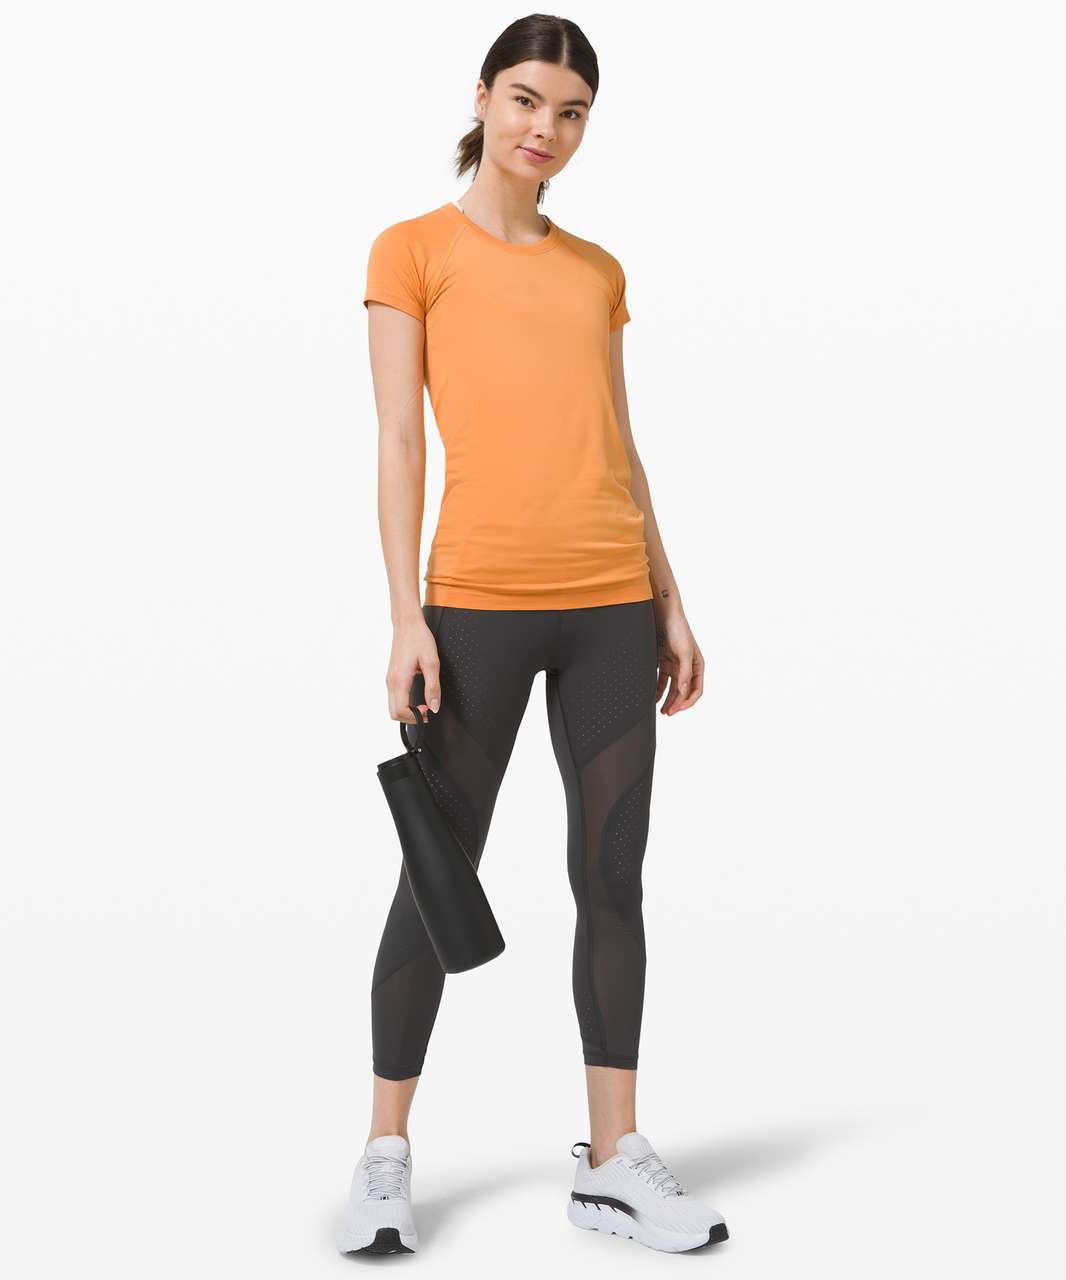 In 30 Seconds or Less: Lululemon Swiftly Tech Long Sleeve 2.0